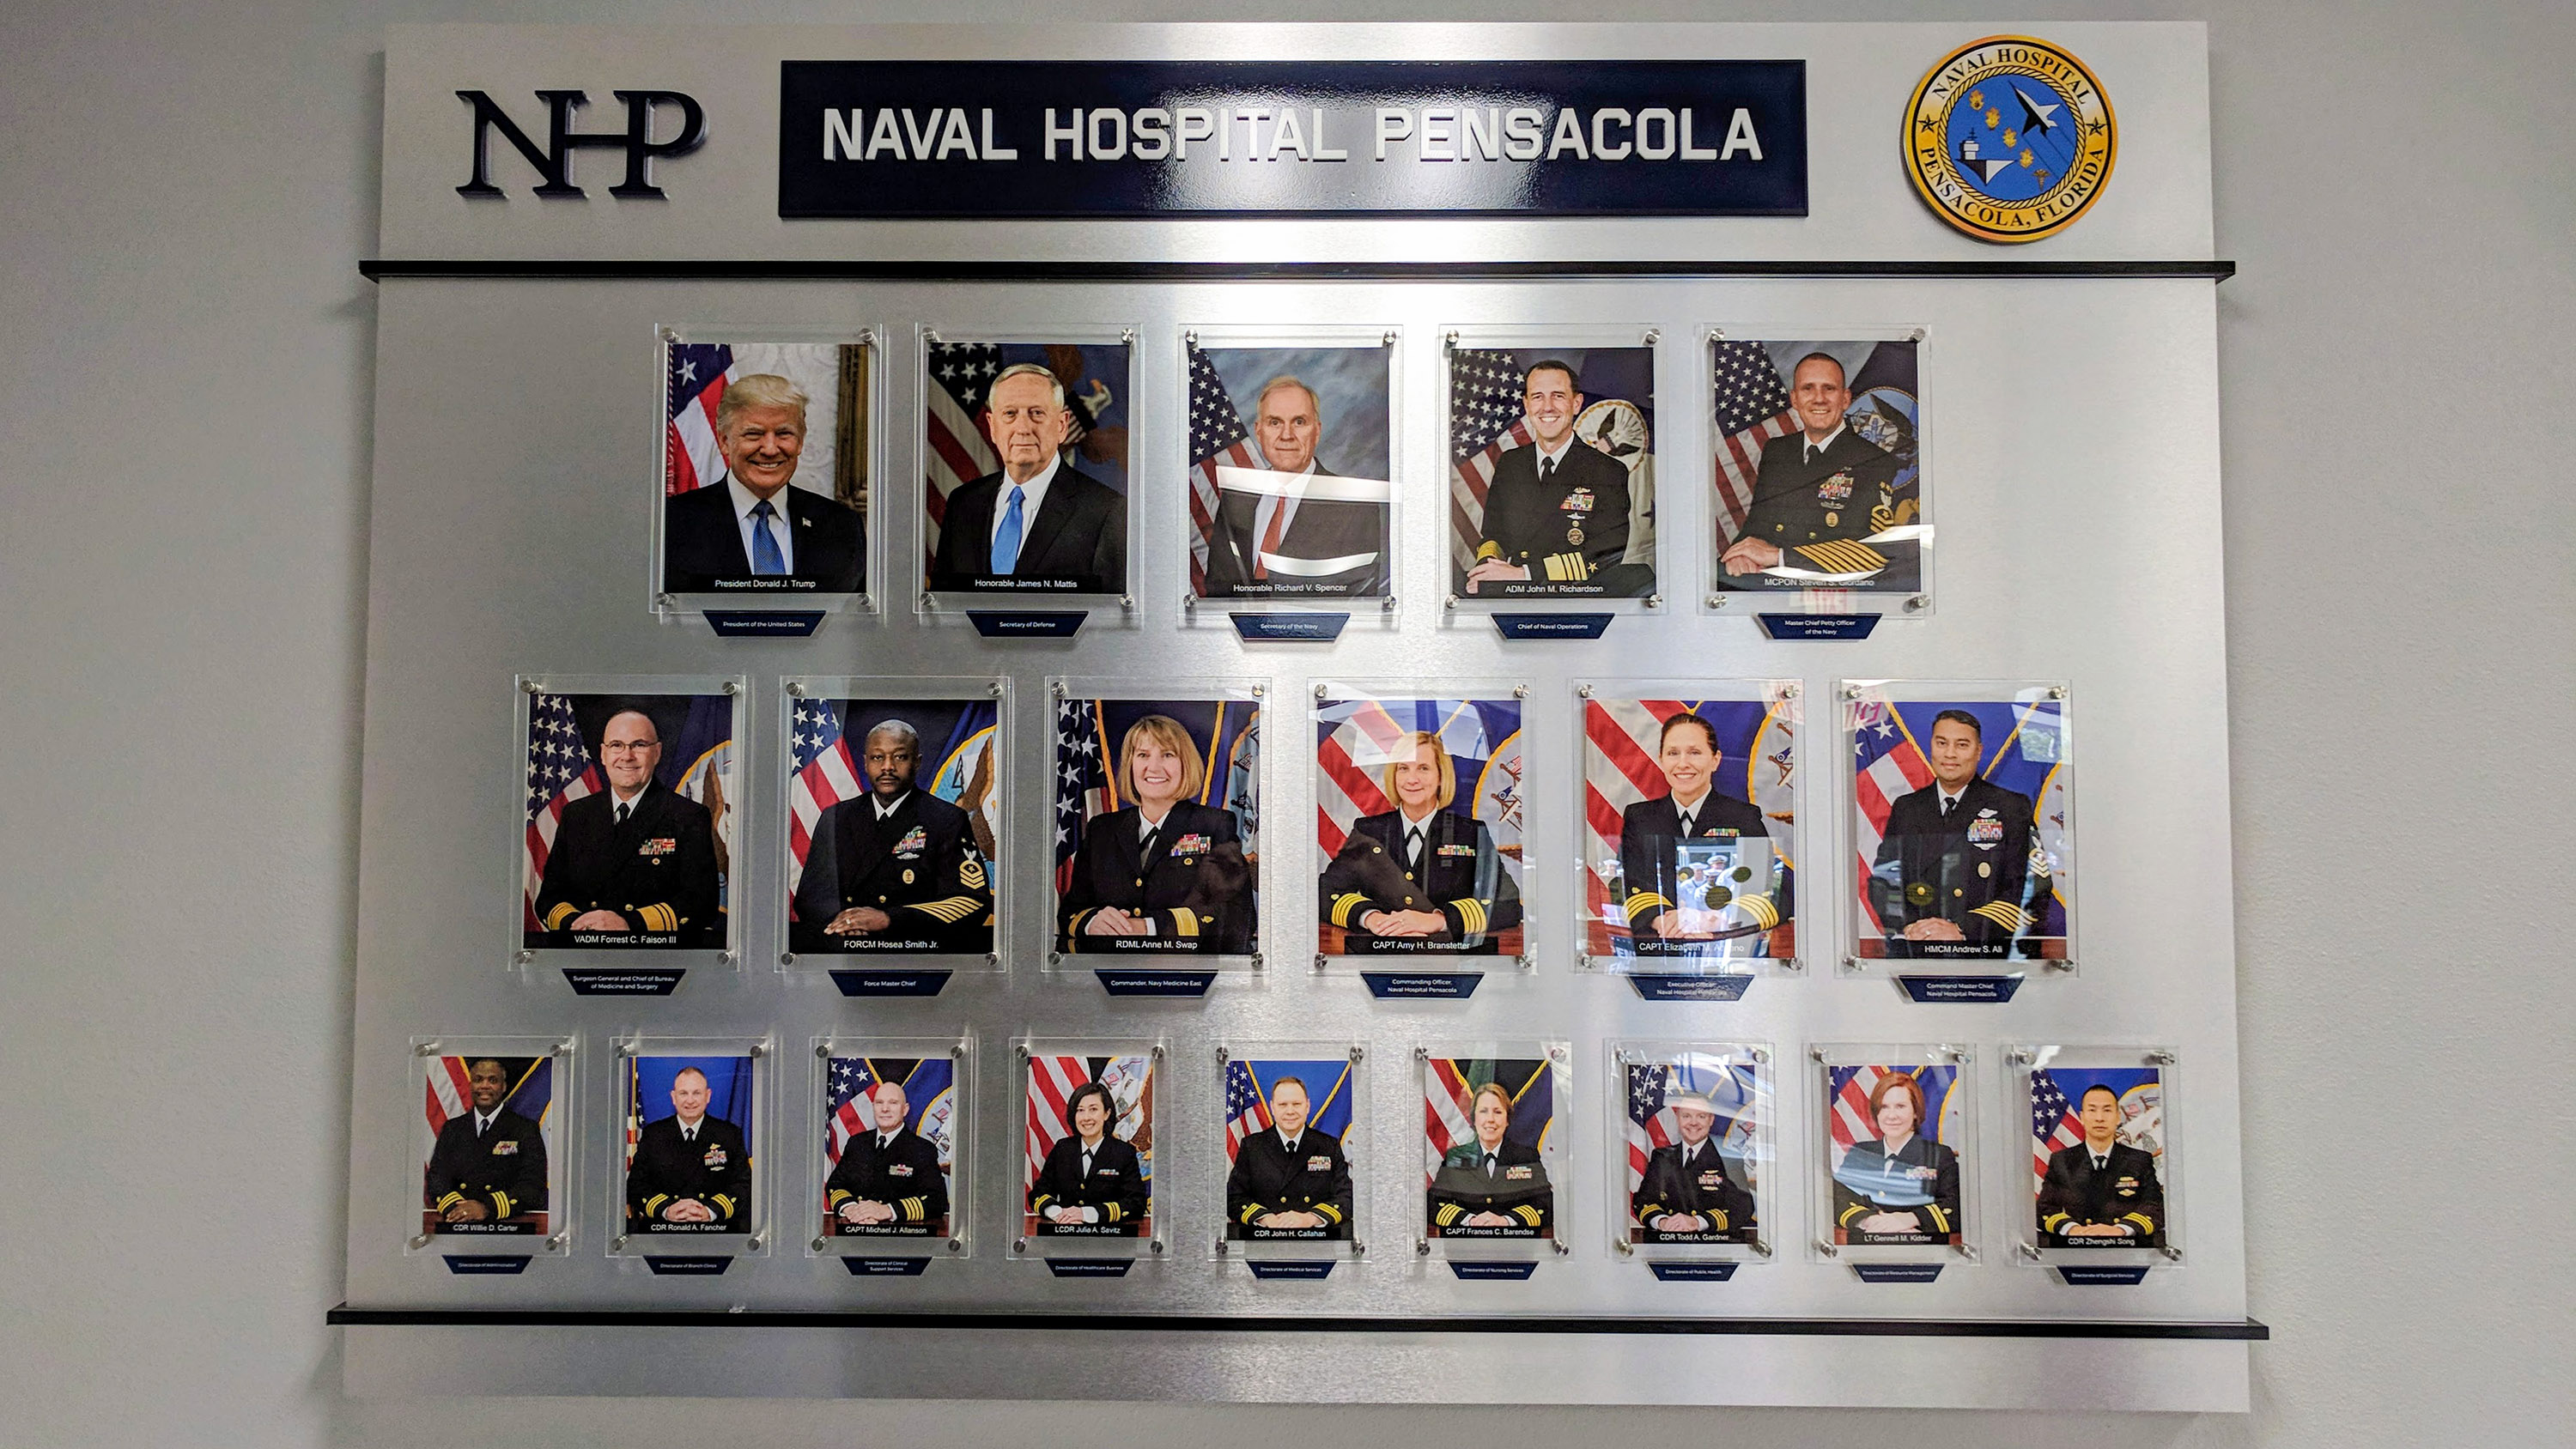 Recognition Display for Naval Hospital Pensacola 